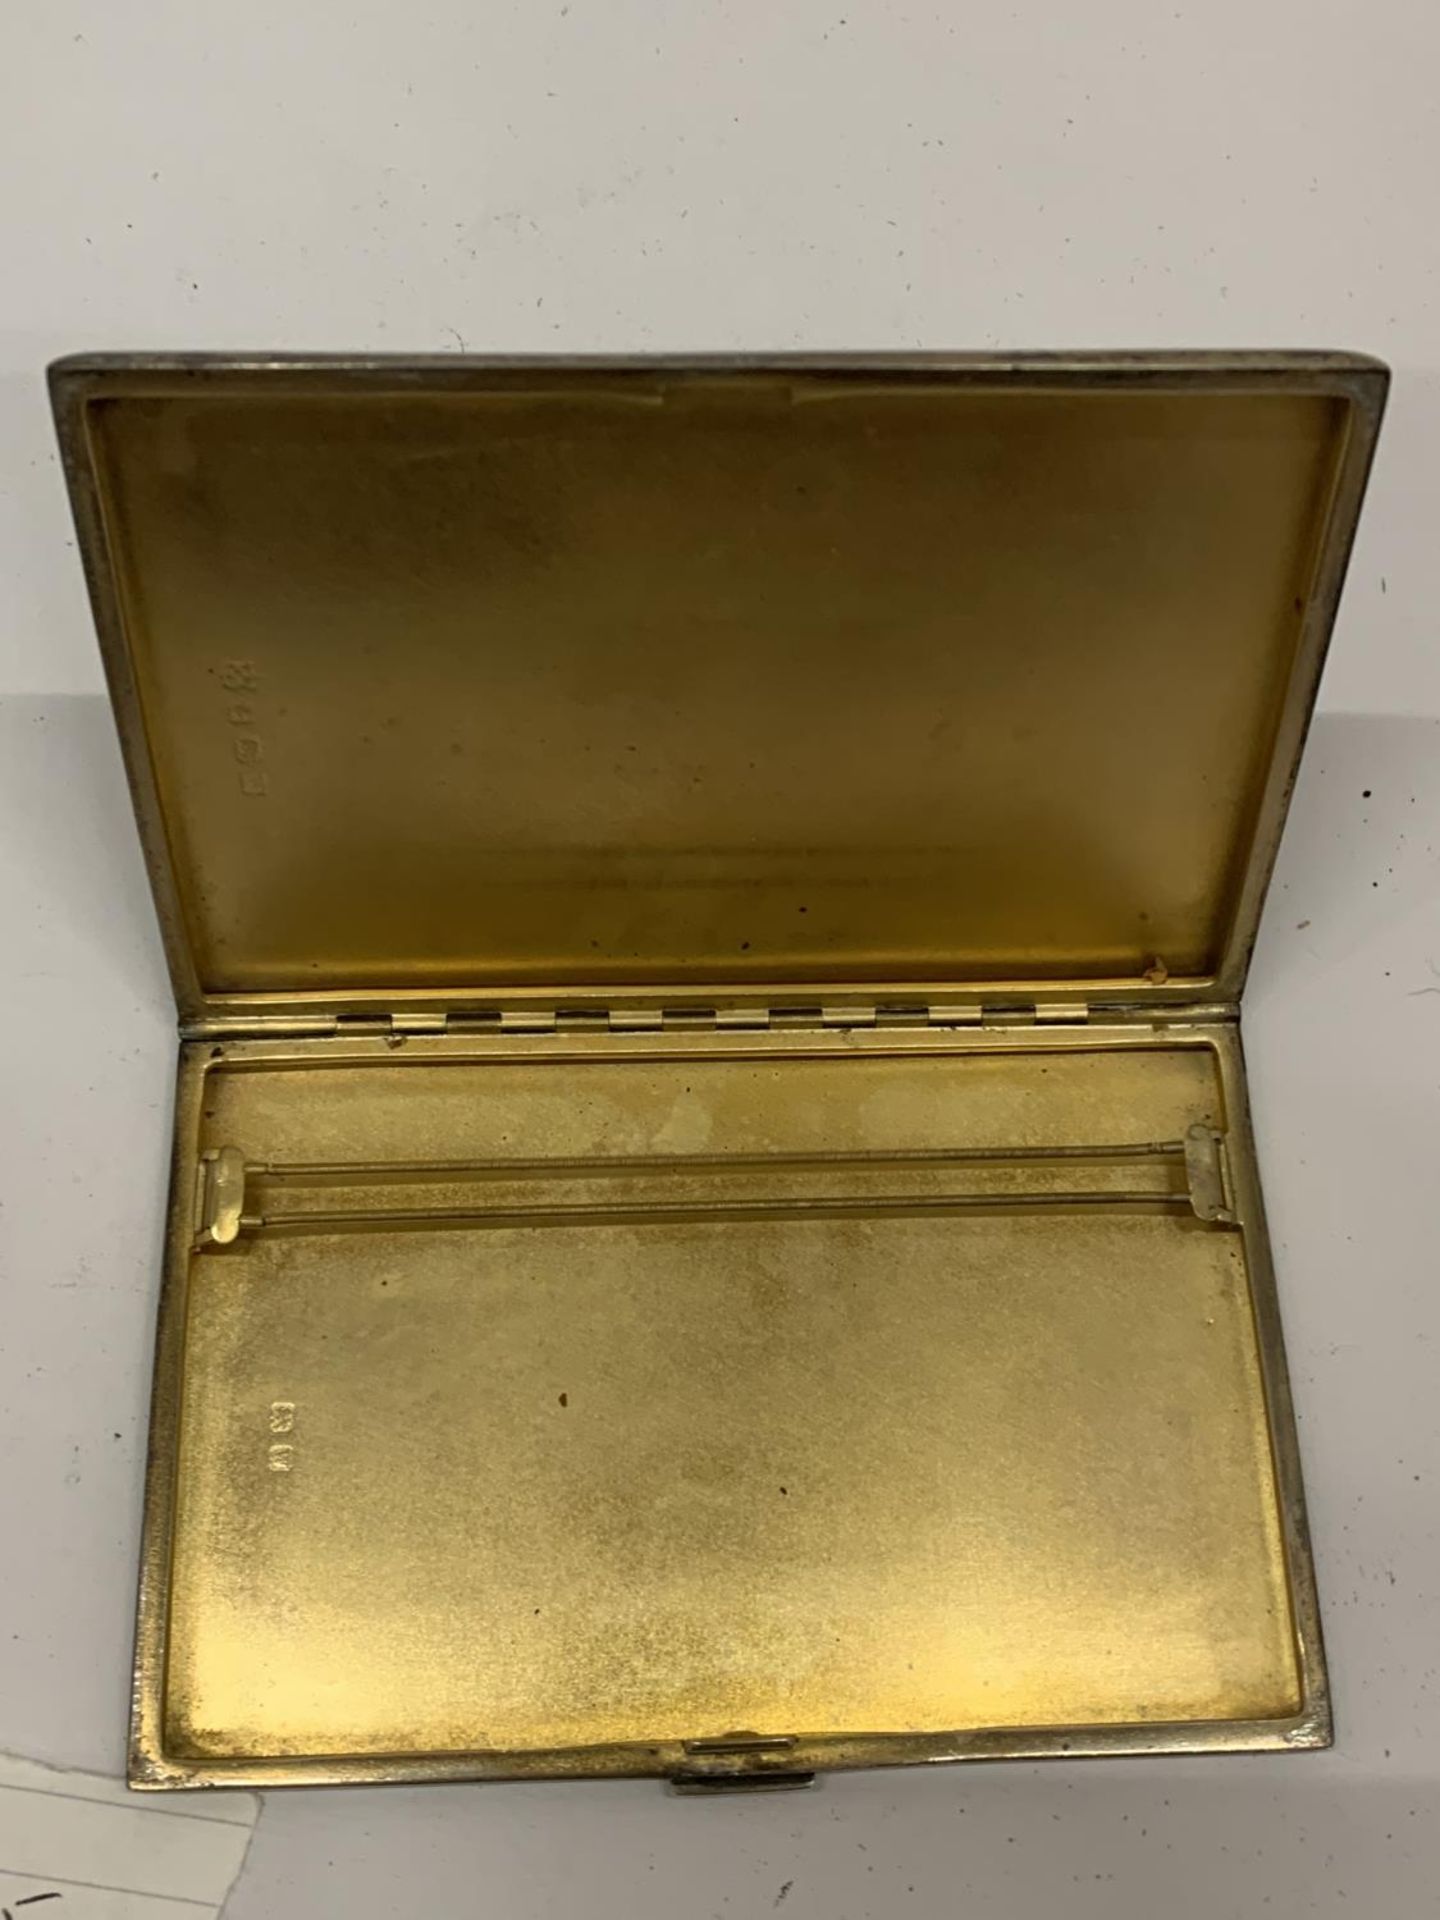 AN ART DECO ENGINE TURNED HALLMARKED SILVER CARD CASE, WEIGHT 194G - Image 4 of 6